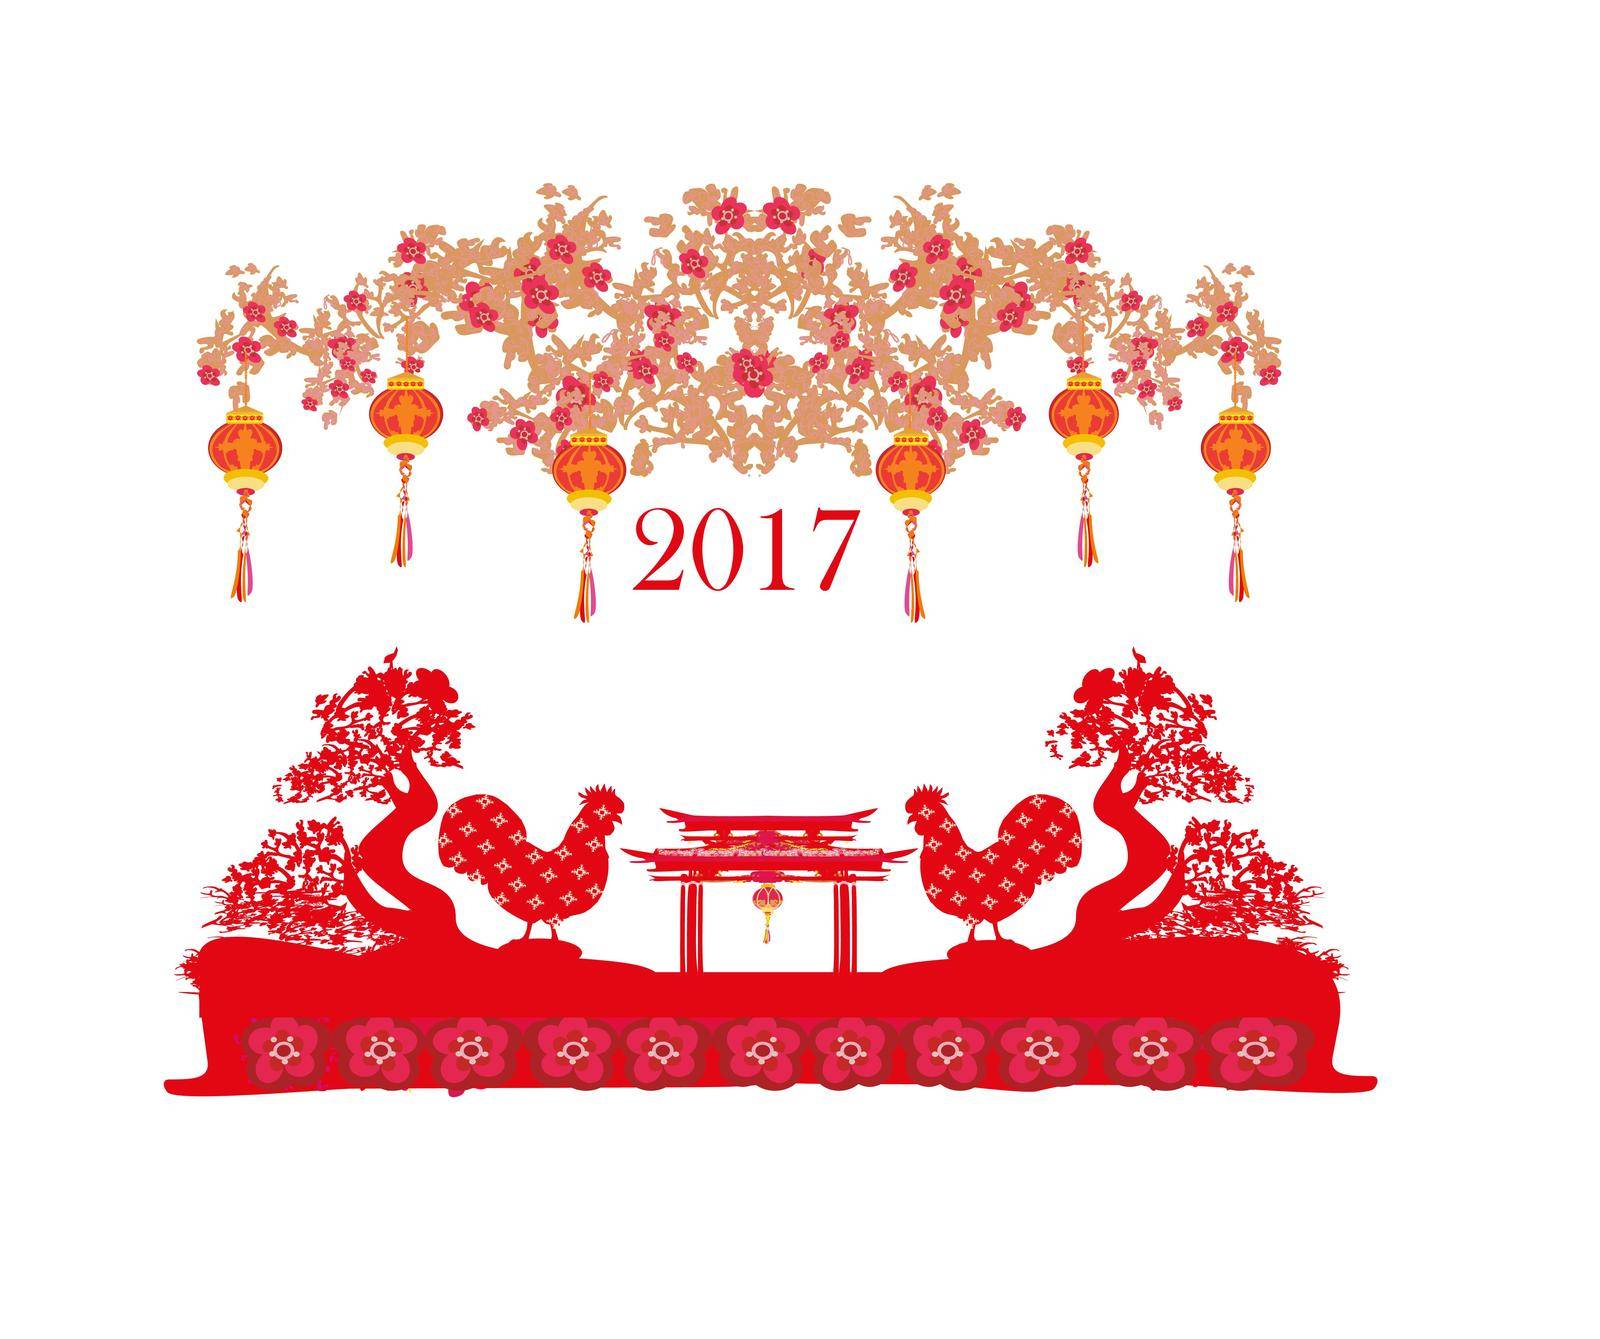 Year of rooster design for Chinese New Year by JackyBrown